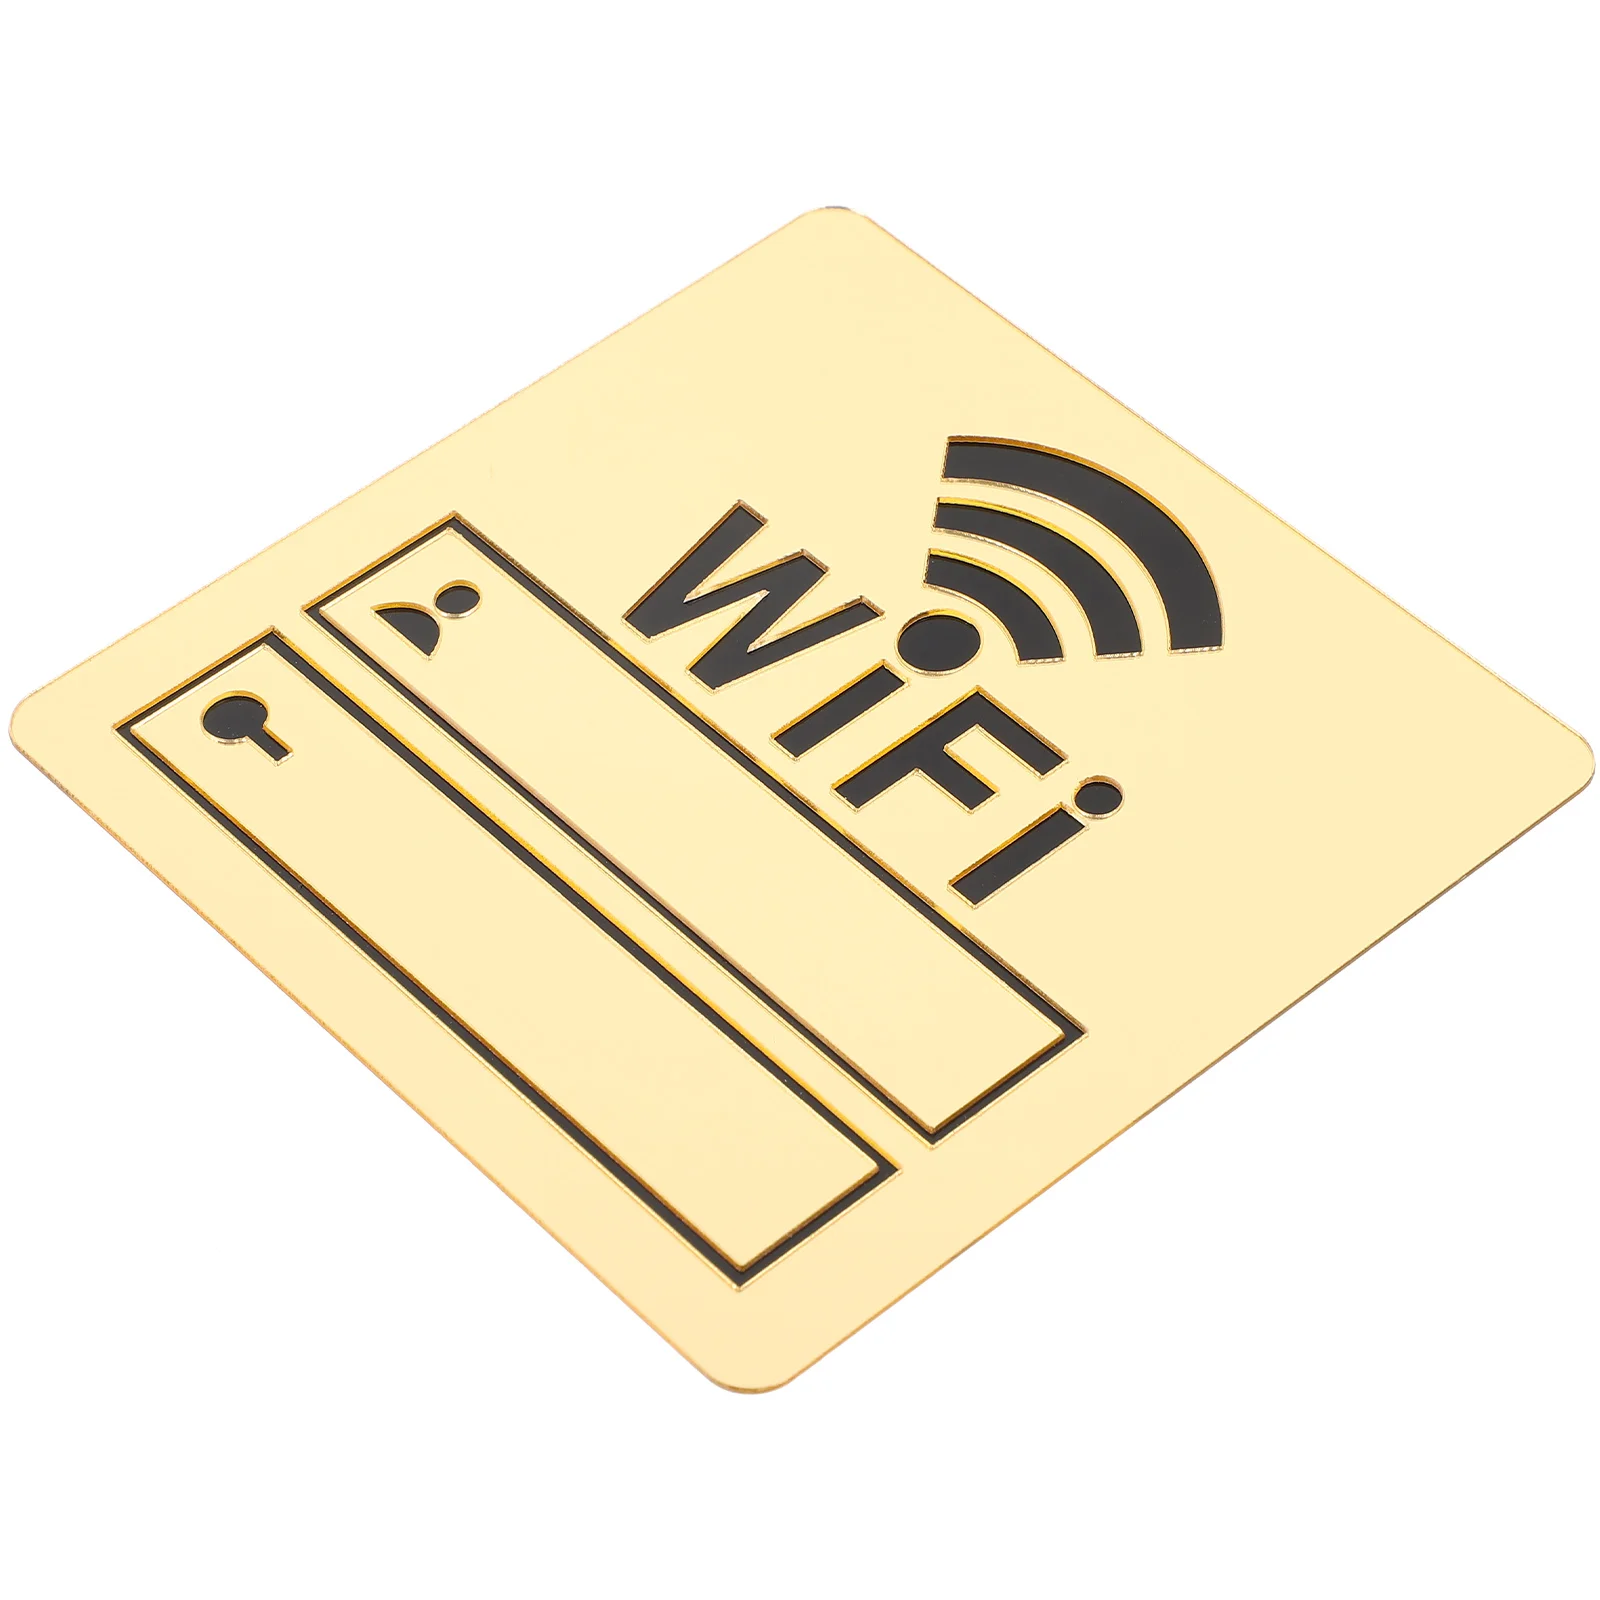 

Wifi Acrylic Sign Reminder Hotel Password Signage Wireless Network The Office Decor Chalkboard